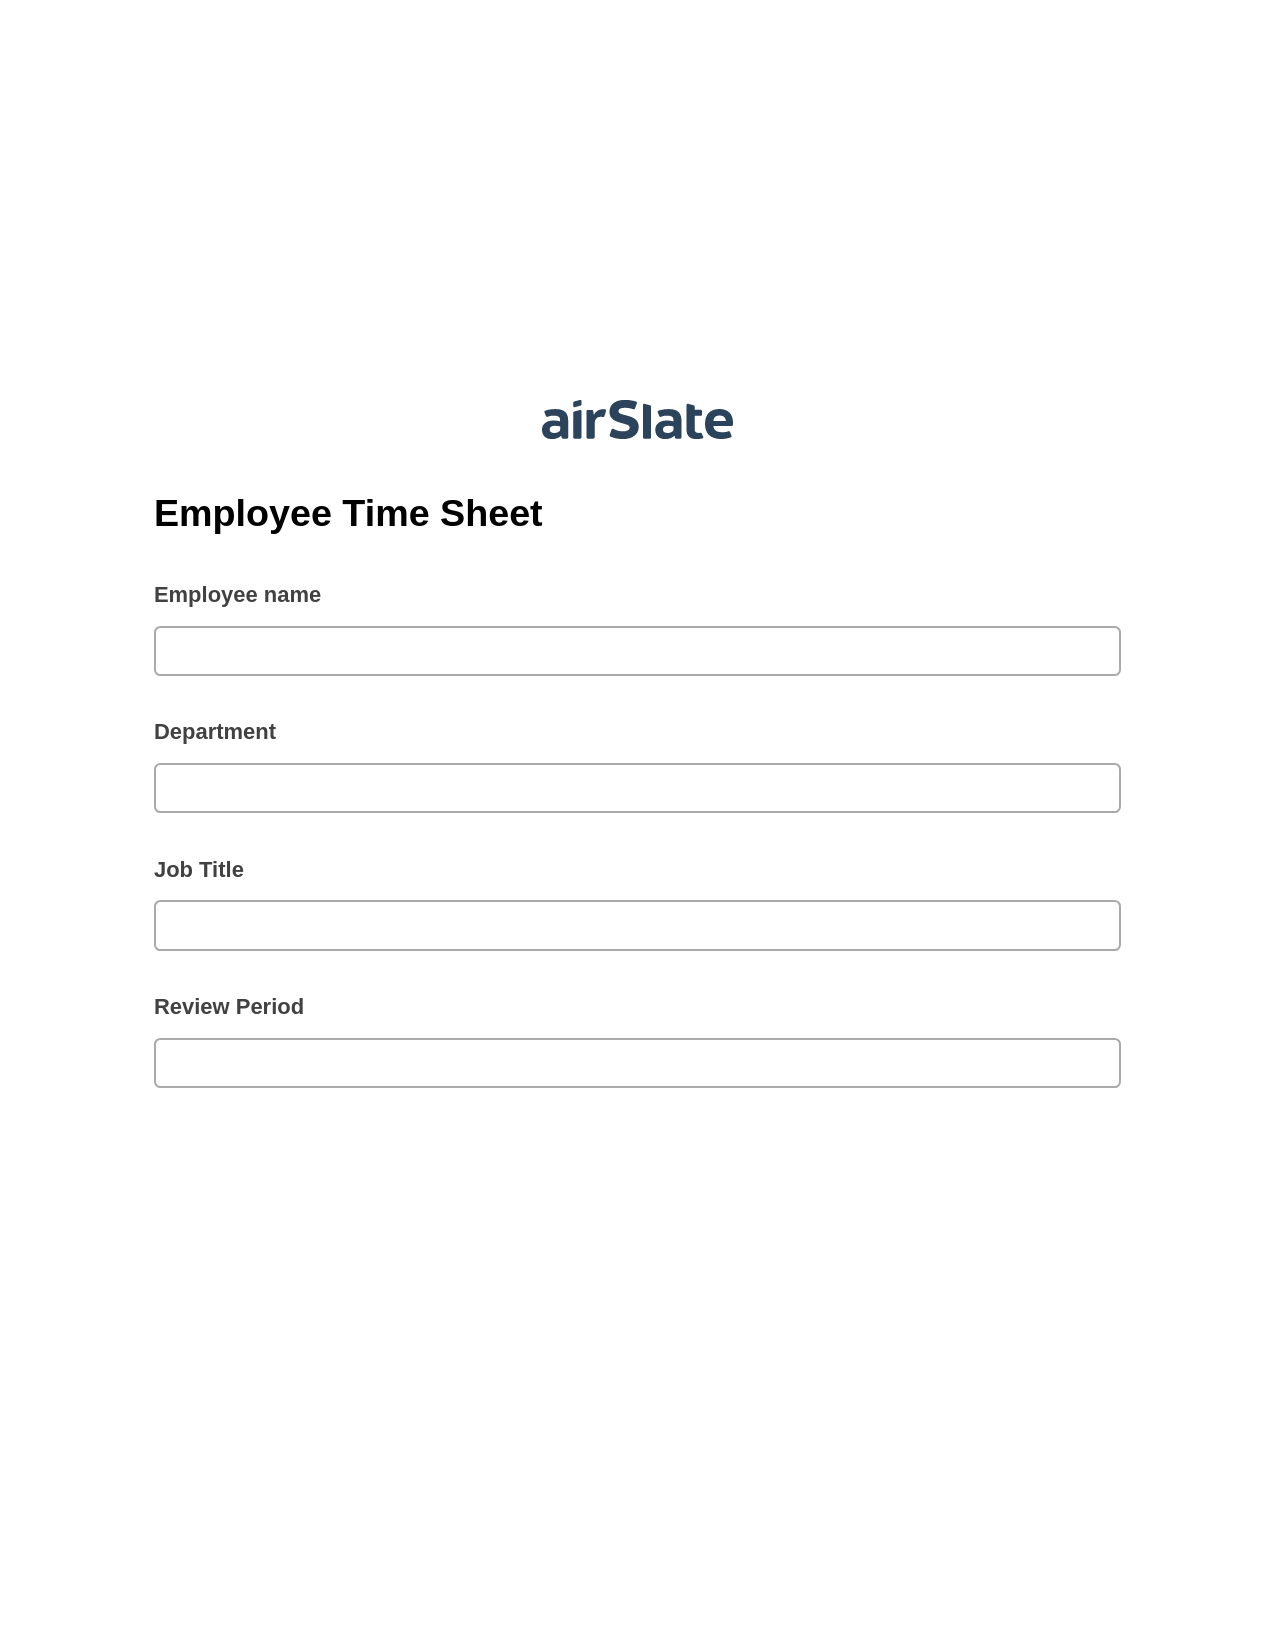 Multirole Employee Time Sheet Pre-fill Document Bot, Create Salesforce Records Bot, Export to Excel 365 Bot